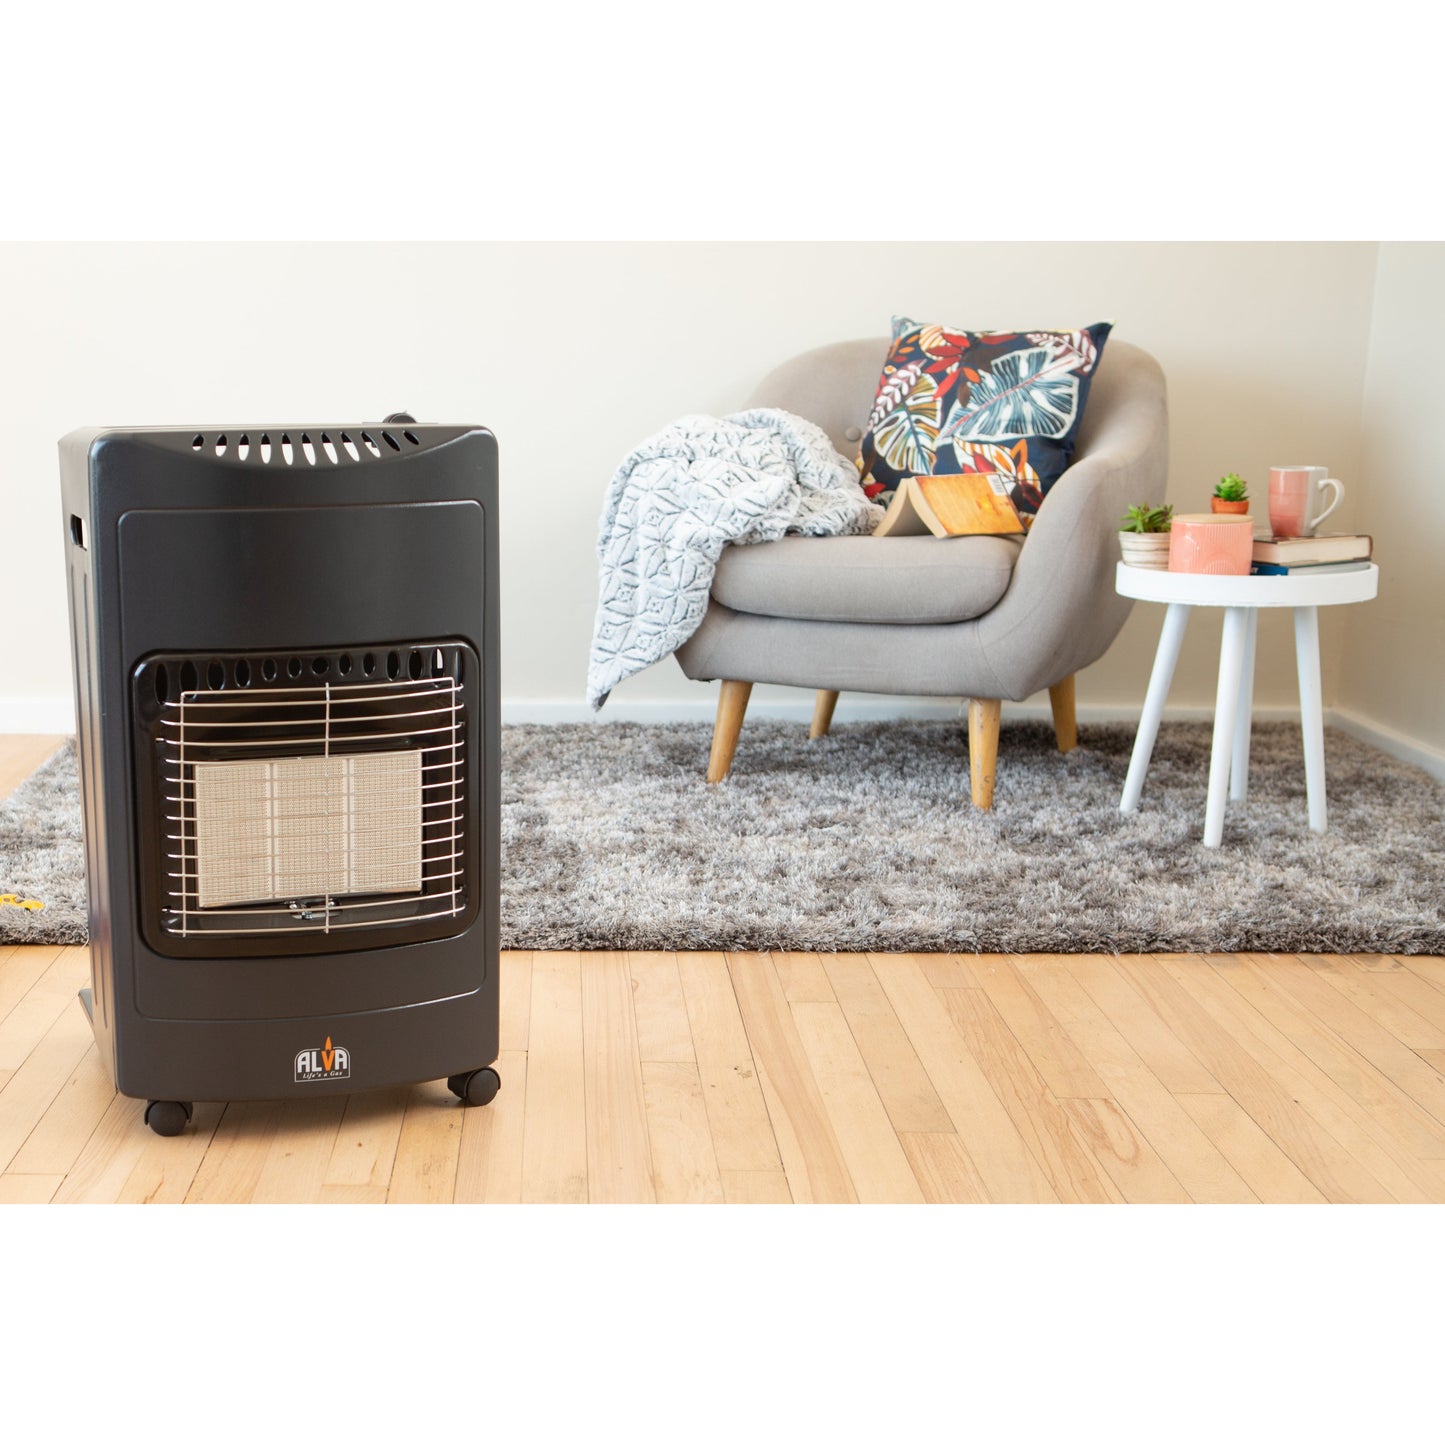 3-PANEL LUXURIOUS INFRARED RADIANT INDOOR GAS HEATER